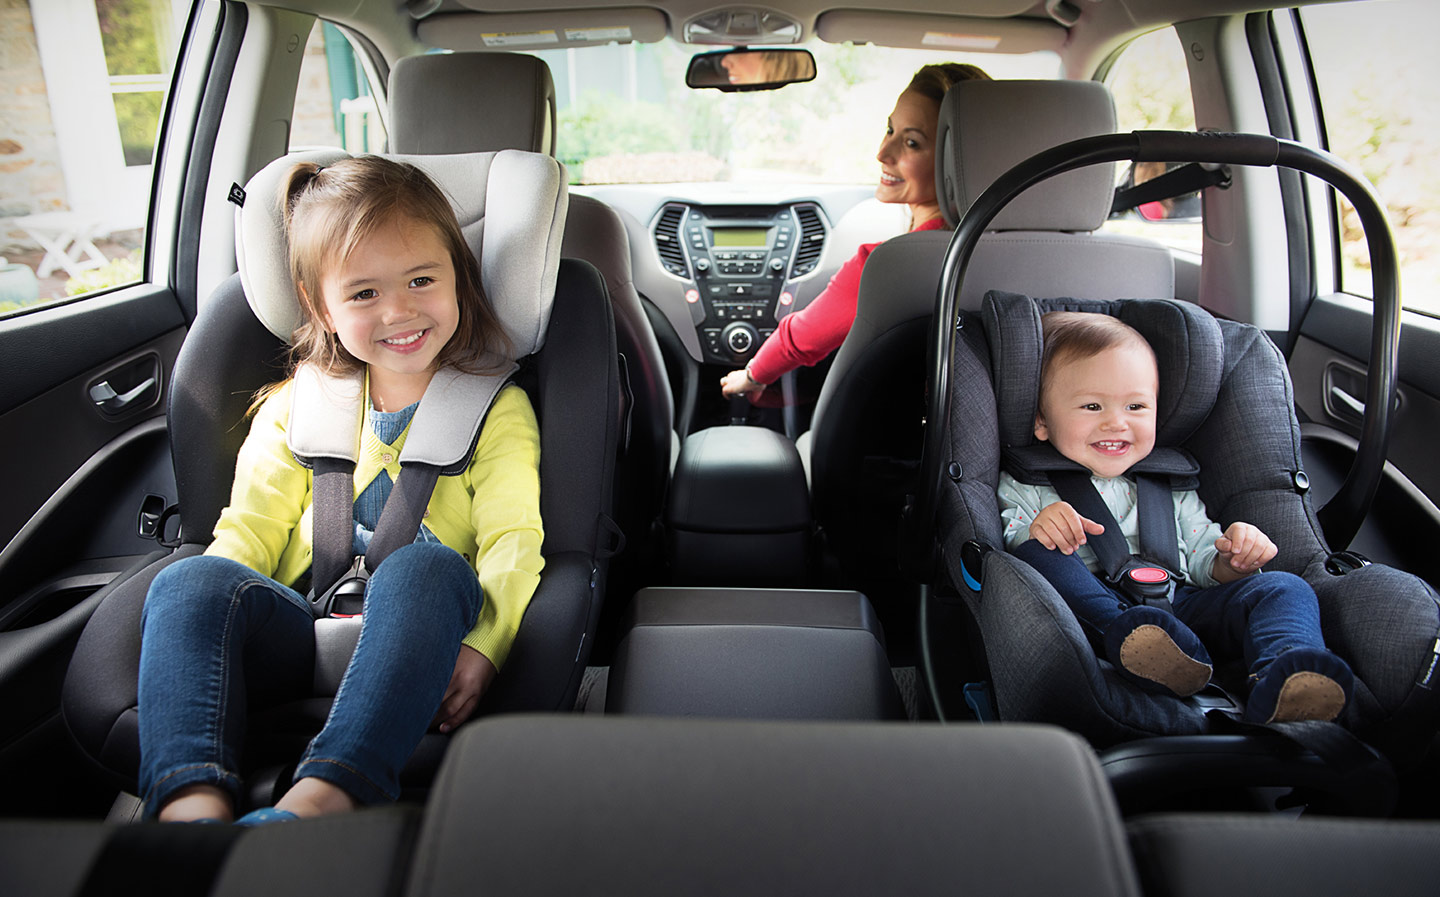 https://www.driving.co.uk/wp-content/uploads/sites/5/2017/07/child-seat-reviews.jpg